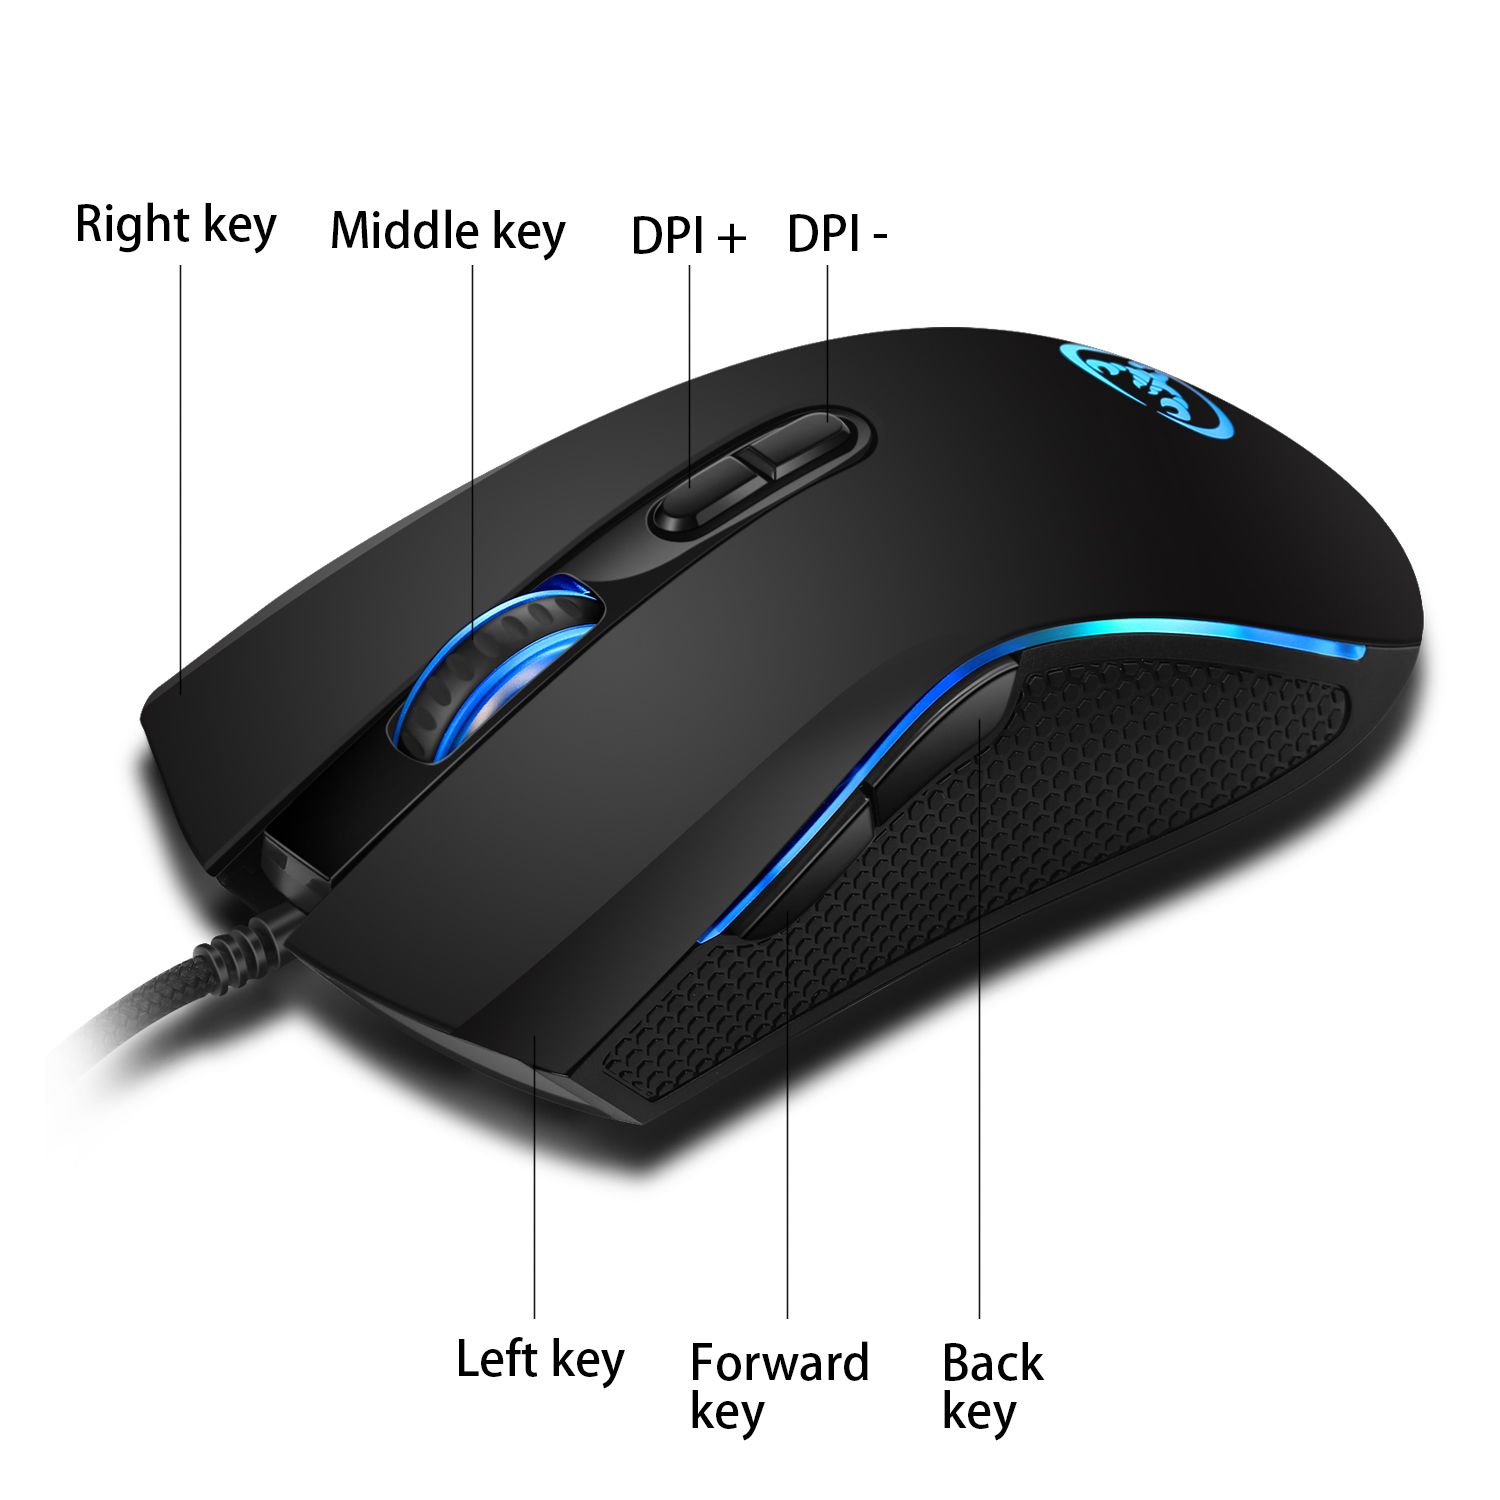 HXSJ-A869-3200DPI-7-Buttons-Mice-7-Colors-LED-Optical-USB-Wired-Mouse-Optical-Gaming-Mouse-1396154